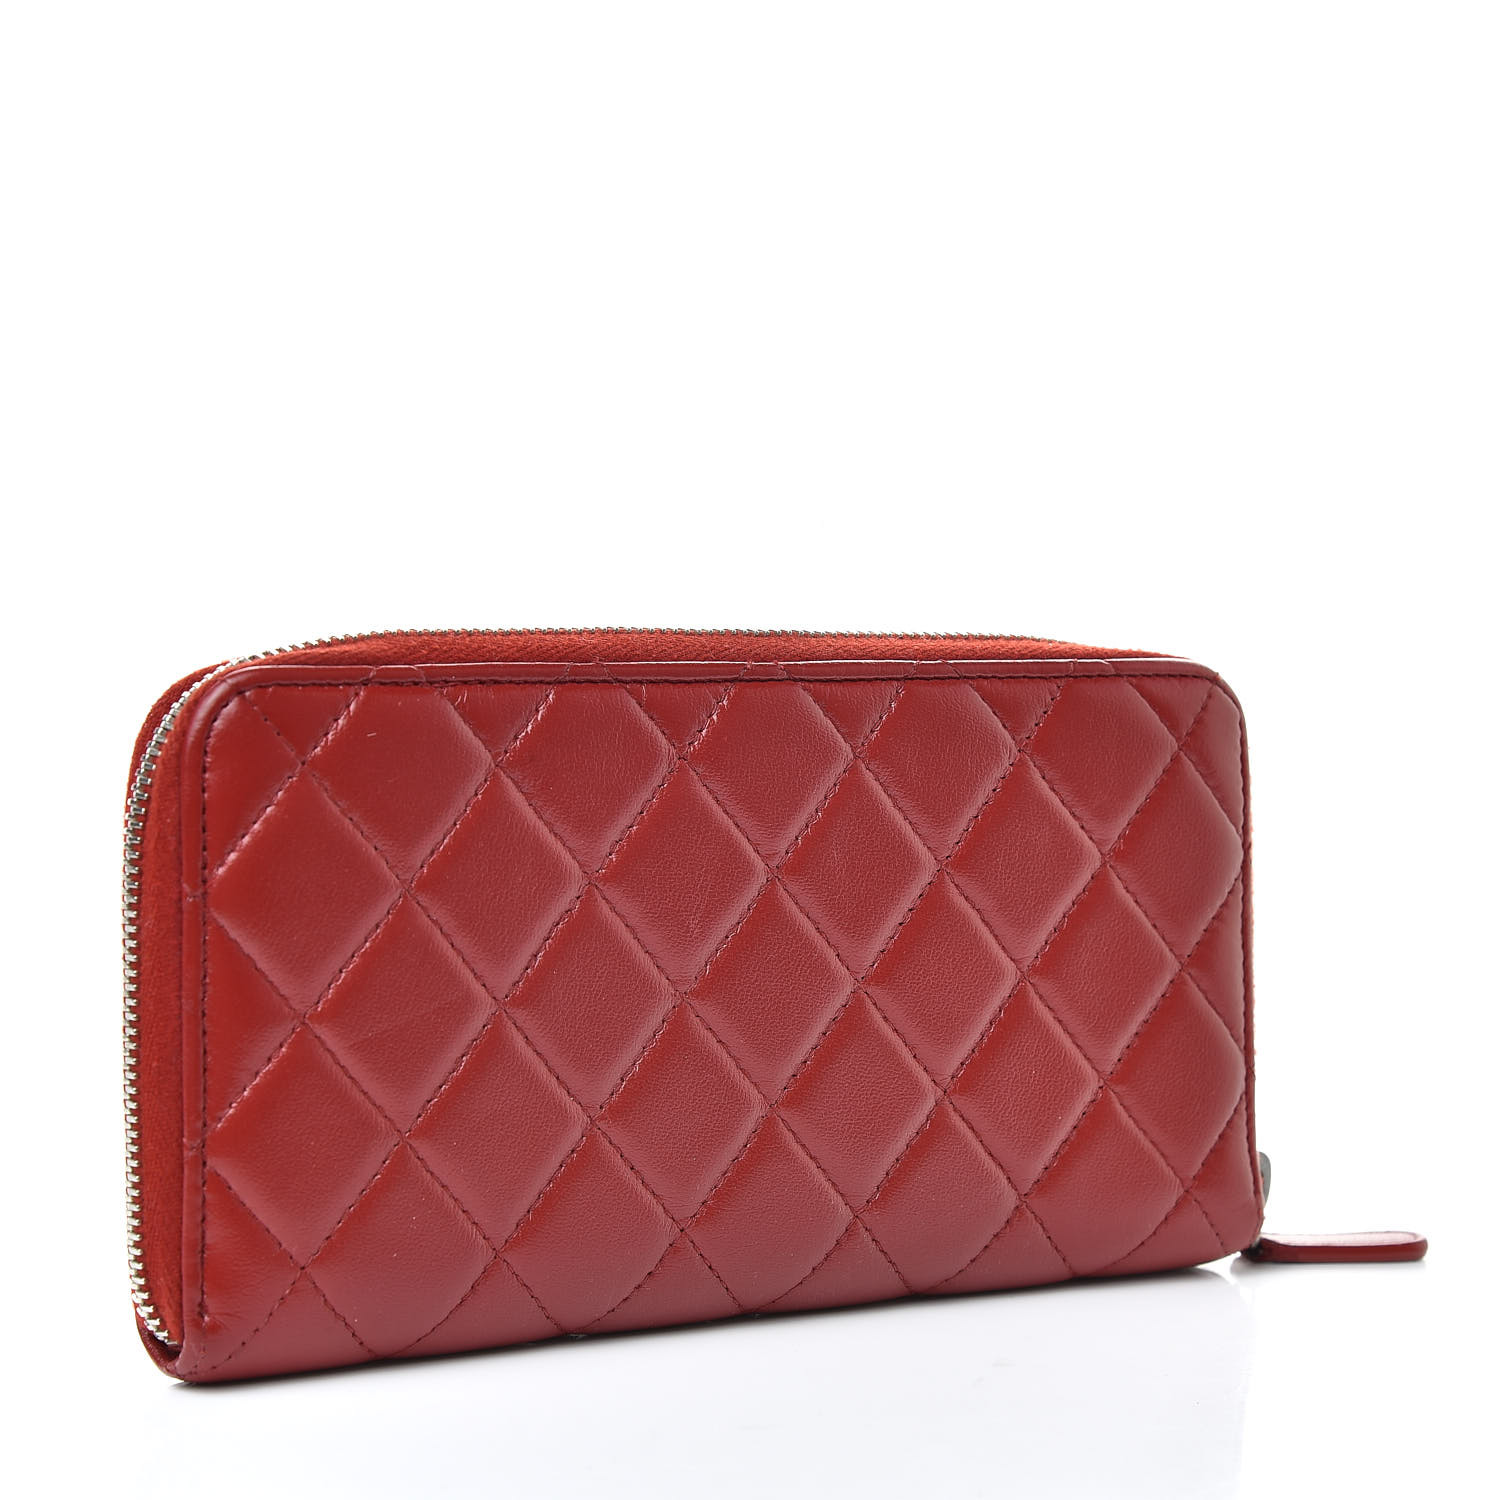 CHANEL Lambskin Quilted Large Gusset Zip Around Wallet Red 494128